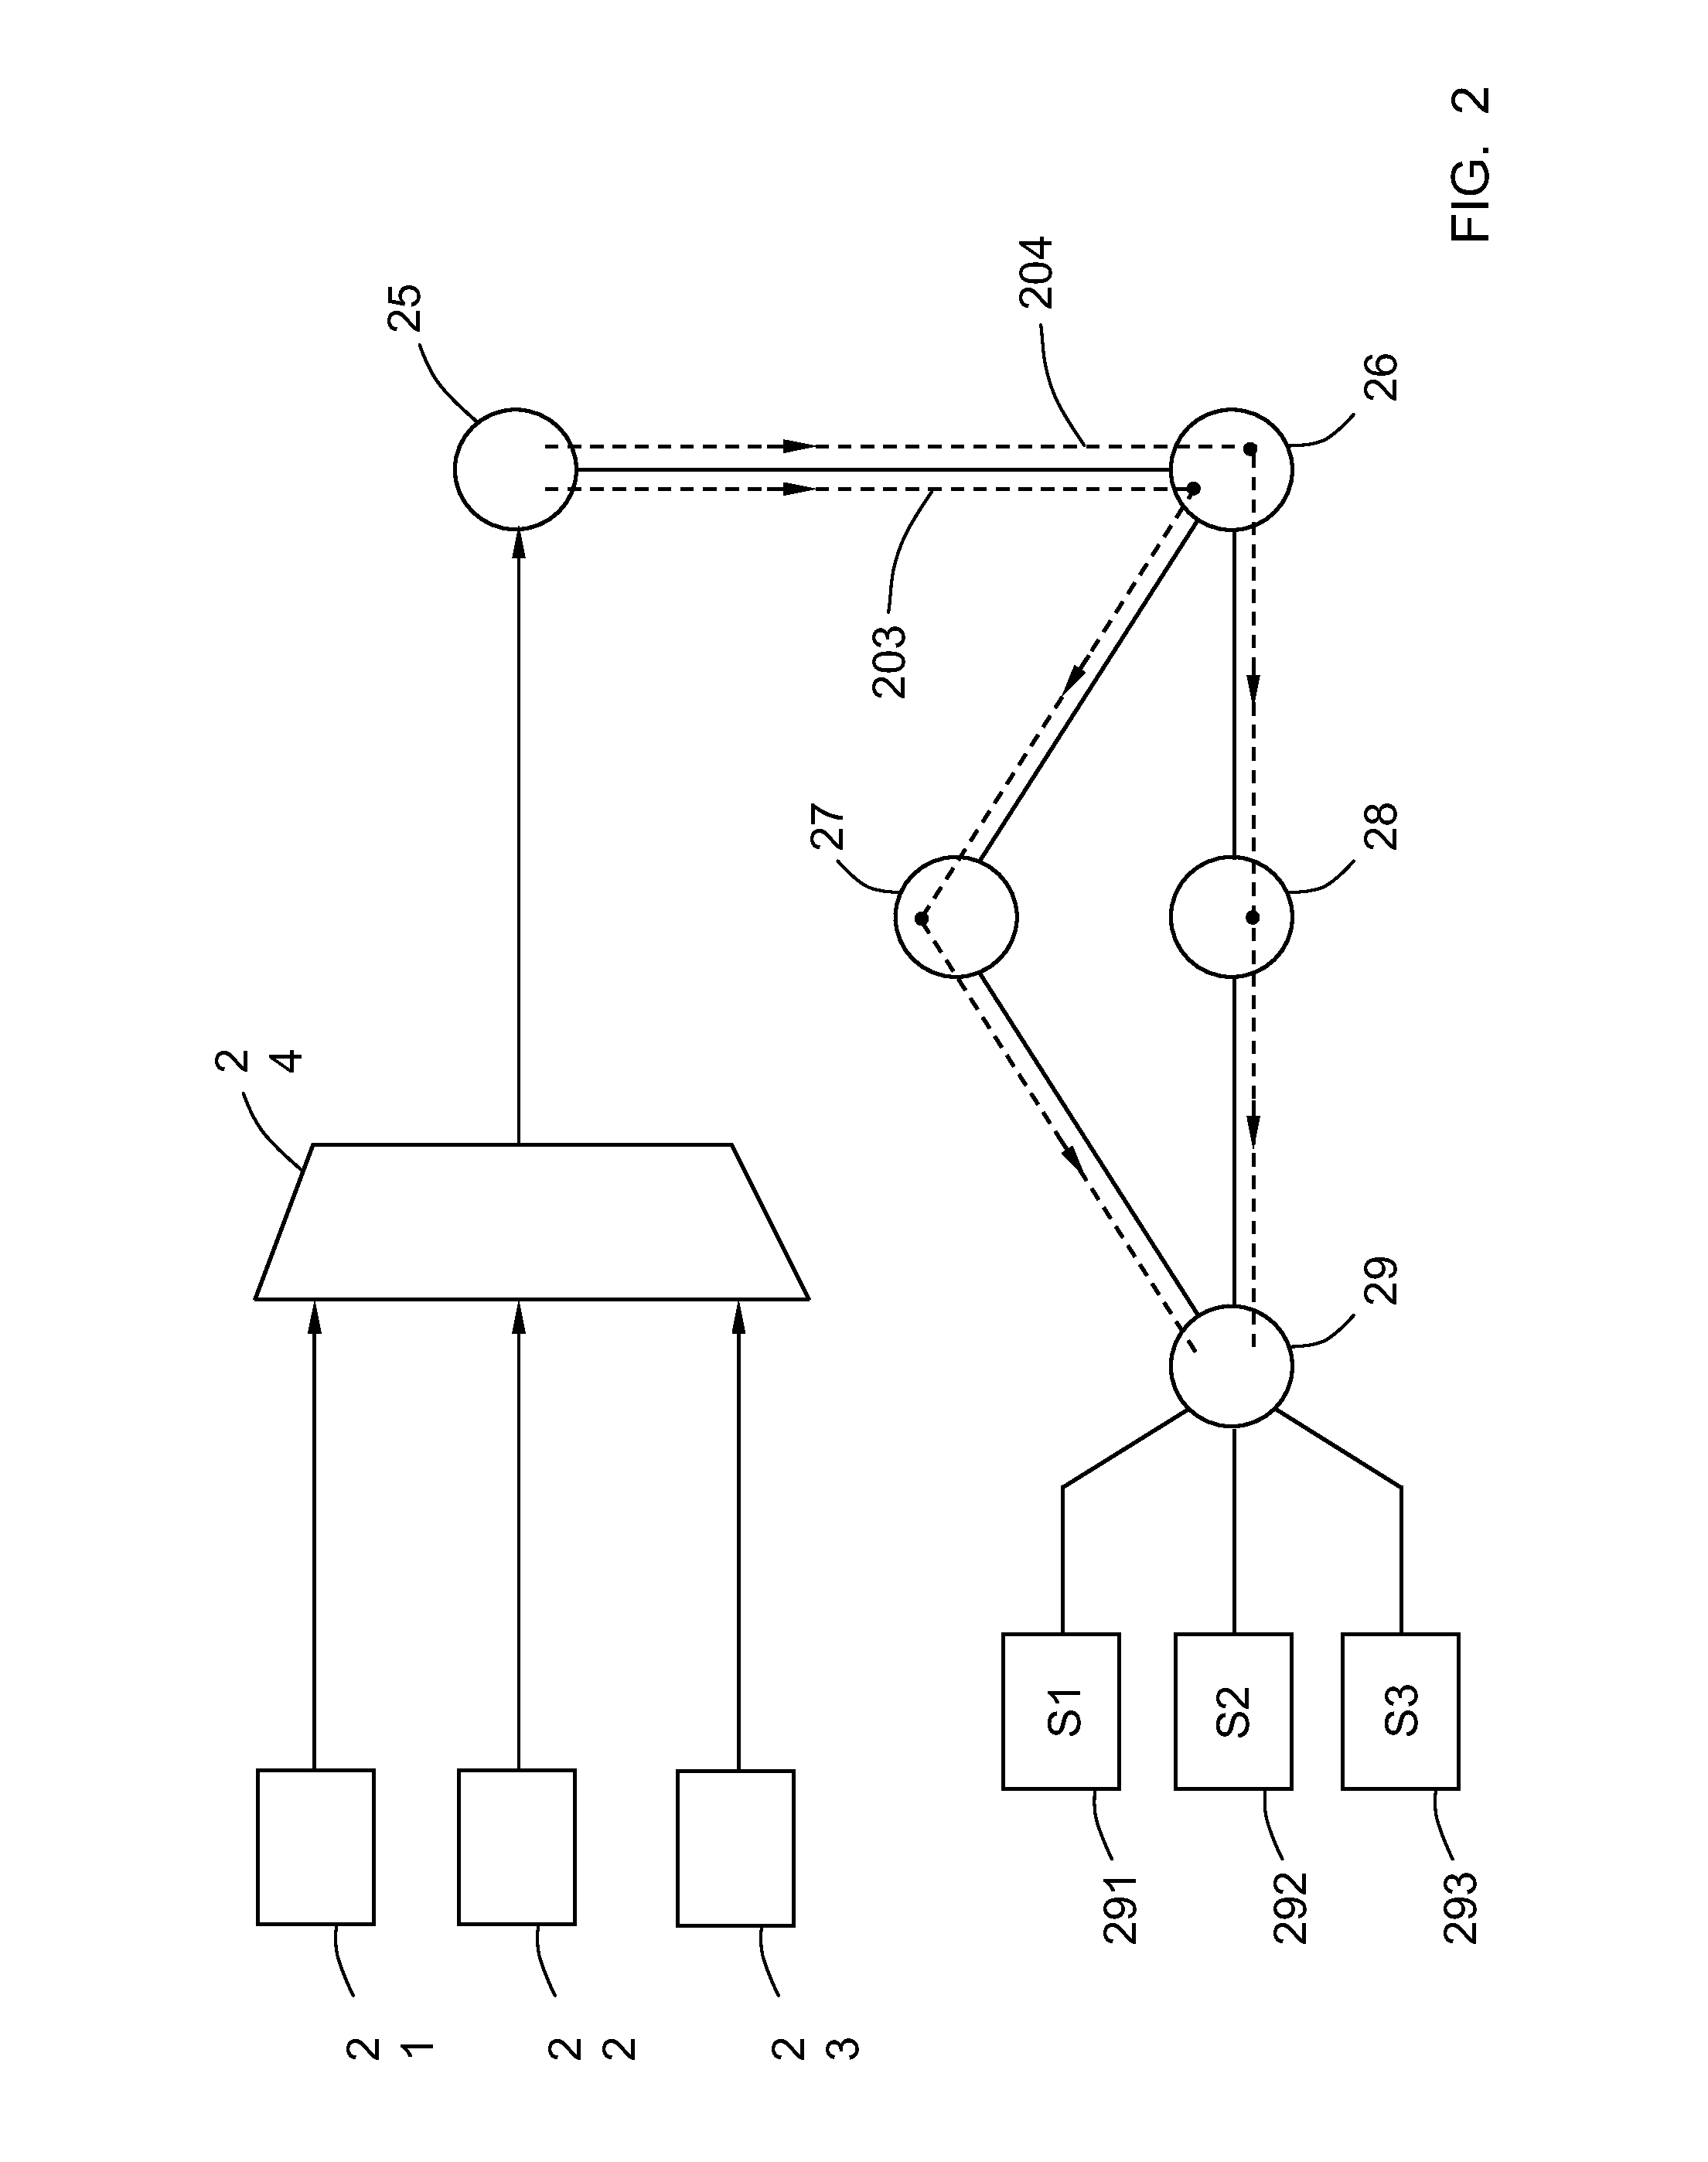 Methods for managing multicast traffic between sources sending data and hosts requesting data and network equipment used to implement the methods